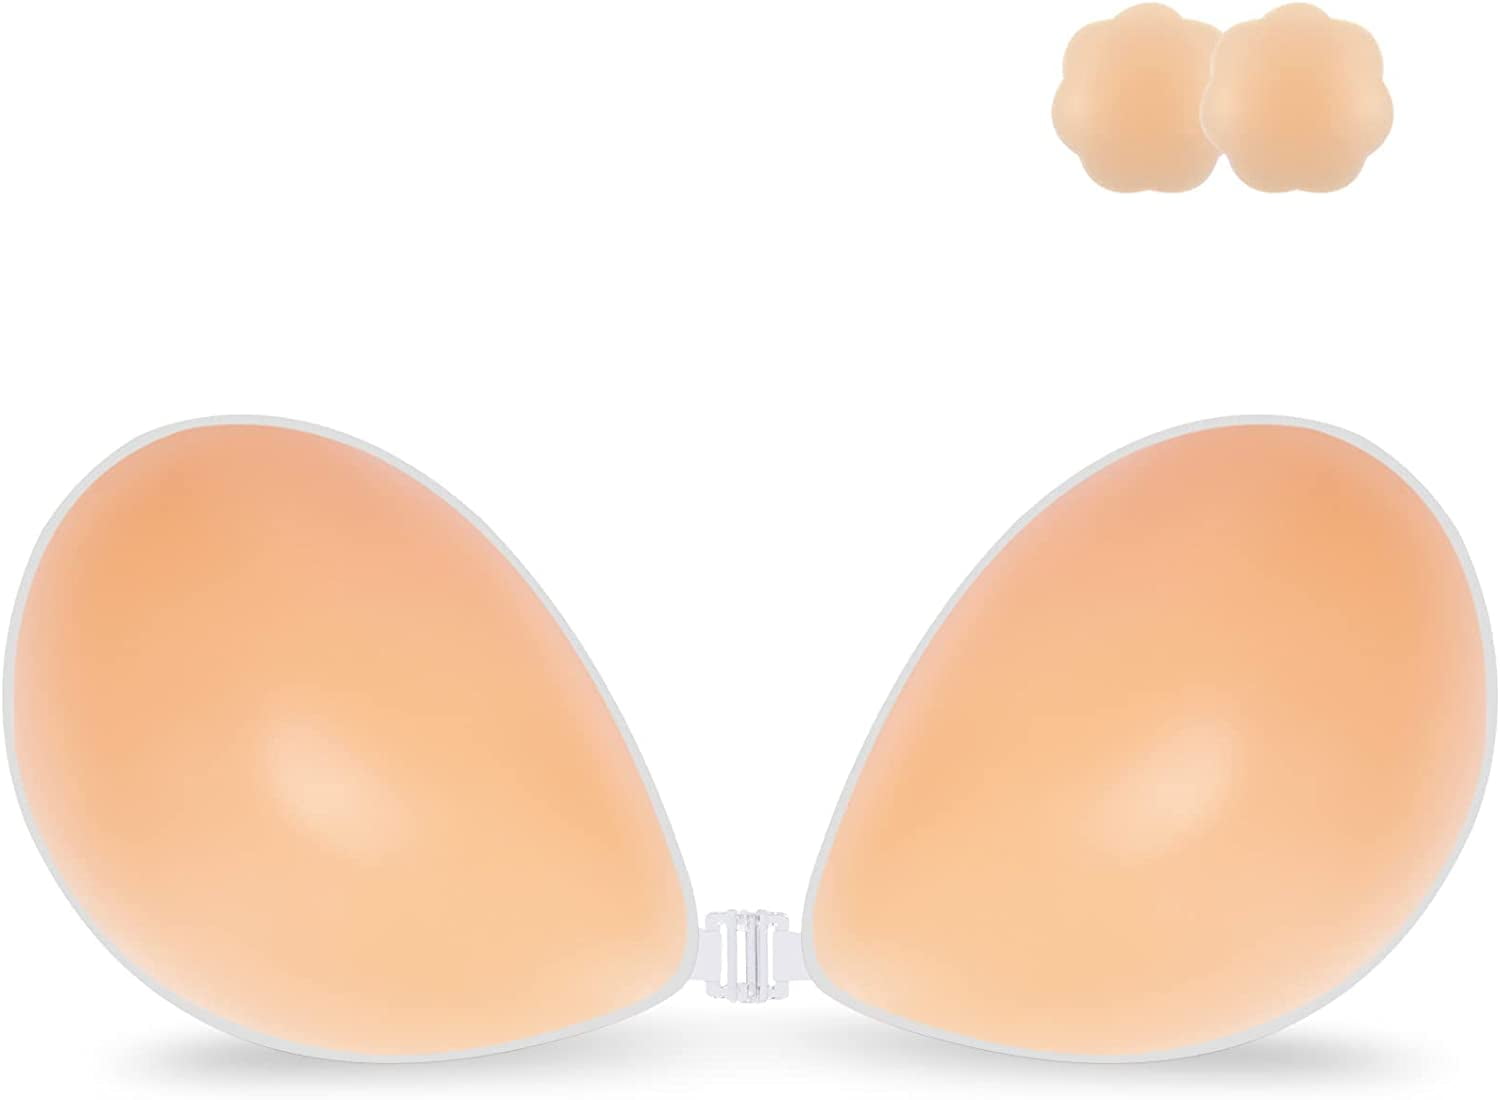  Niidor Adhesive Bra Strapless Sticky Invisible Push Up  Silicone Bra For Backless Dress